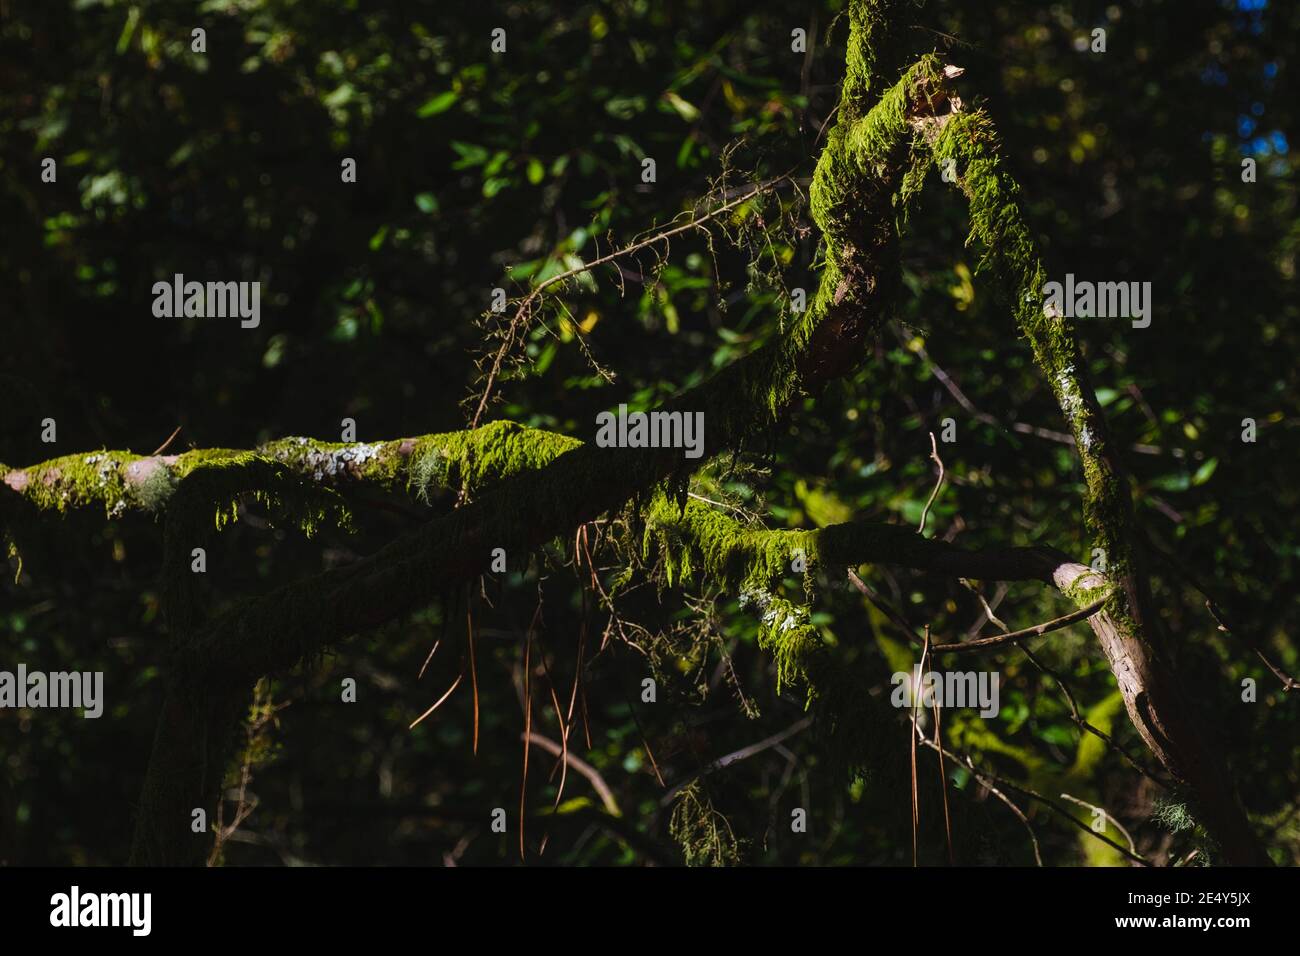 A rotten old tree brunch covered of green moss in the shadows beeing partially litted but the nright sunshine light in the morning Stock Photo